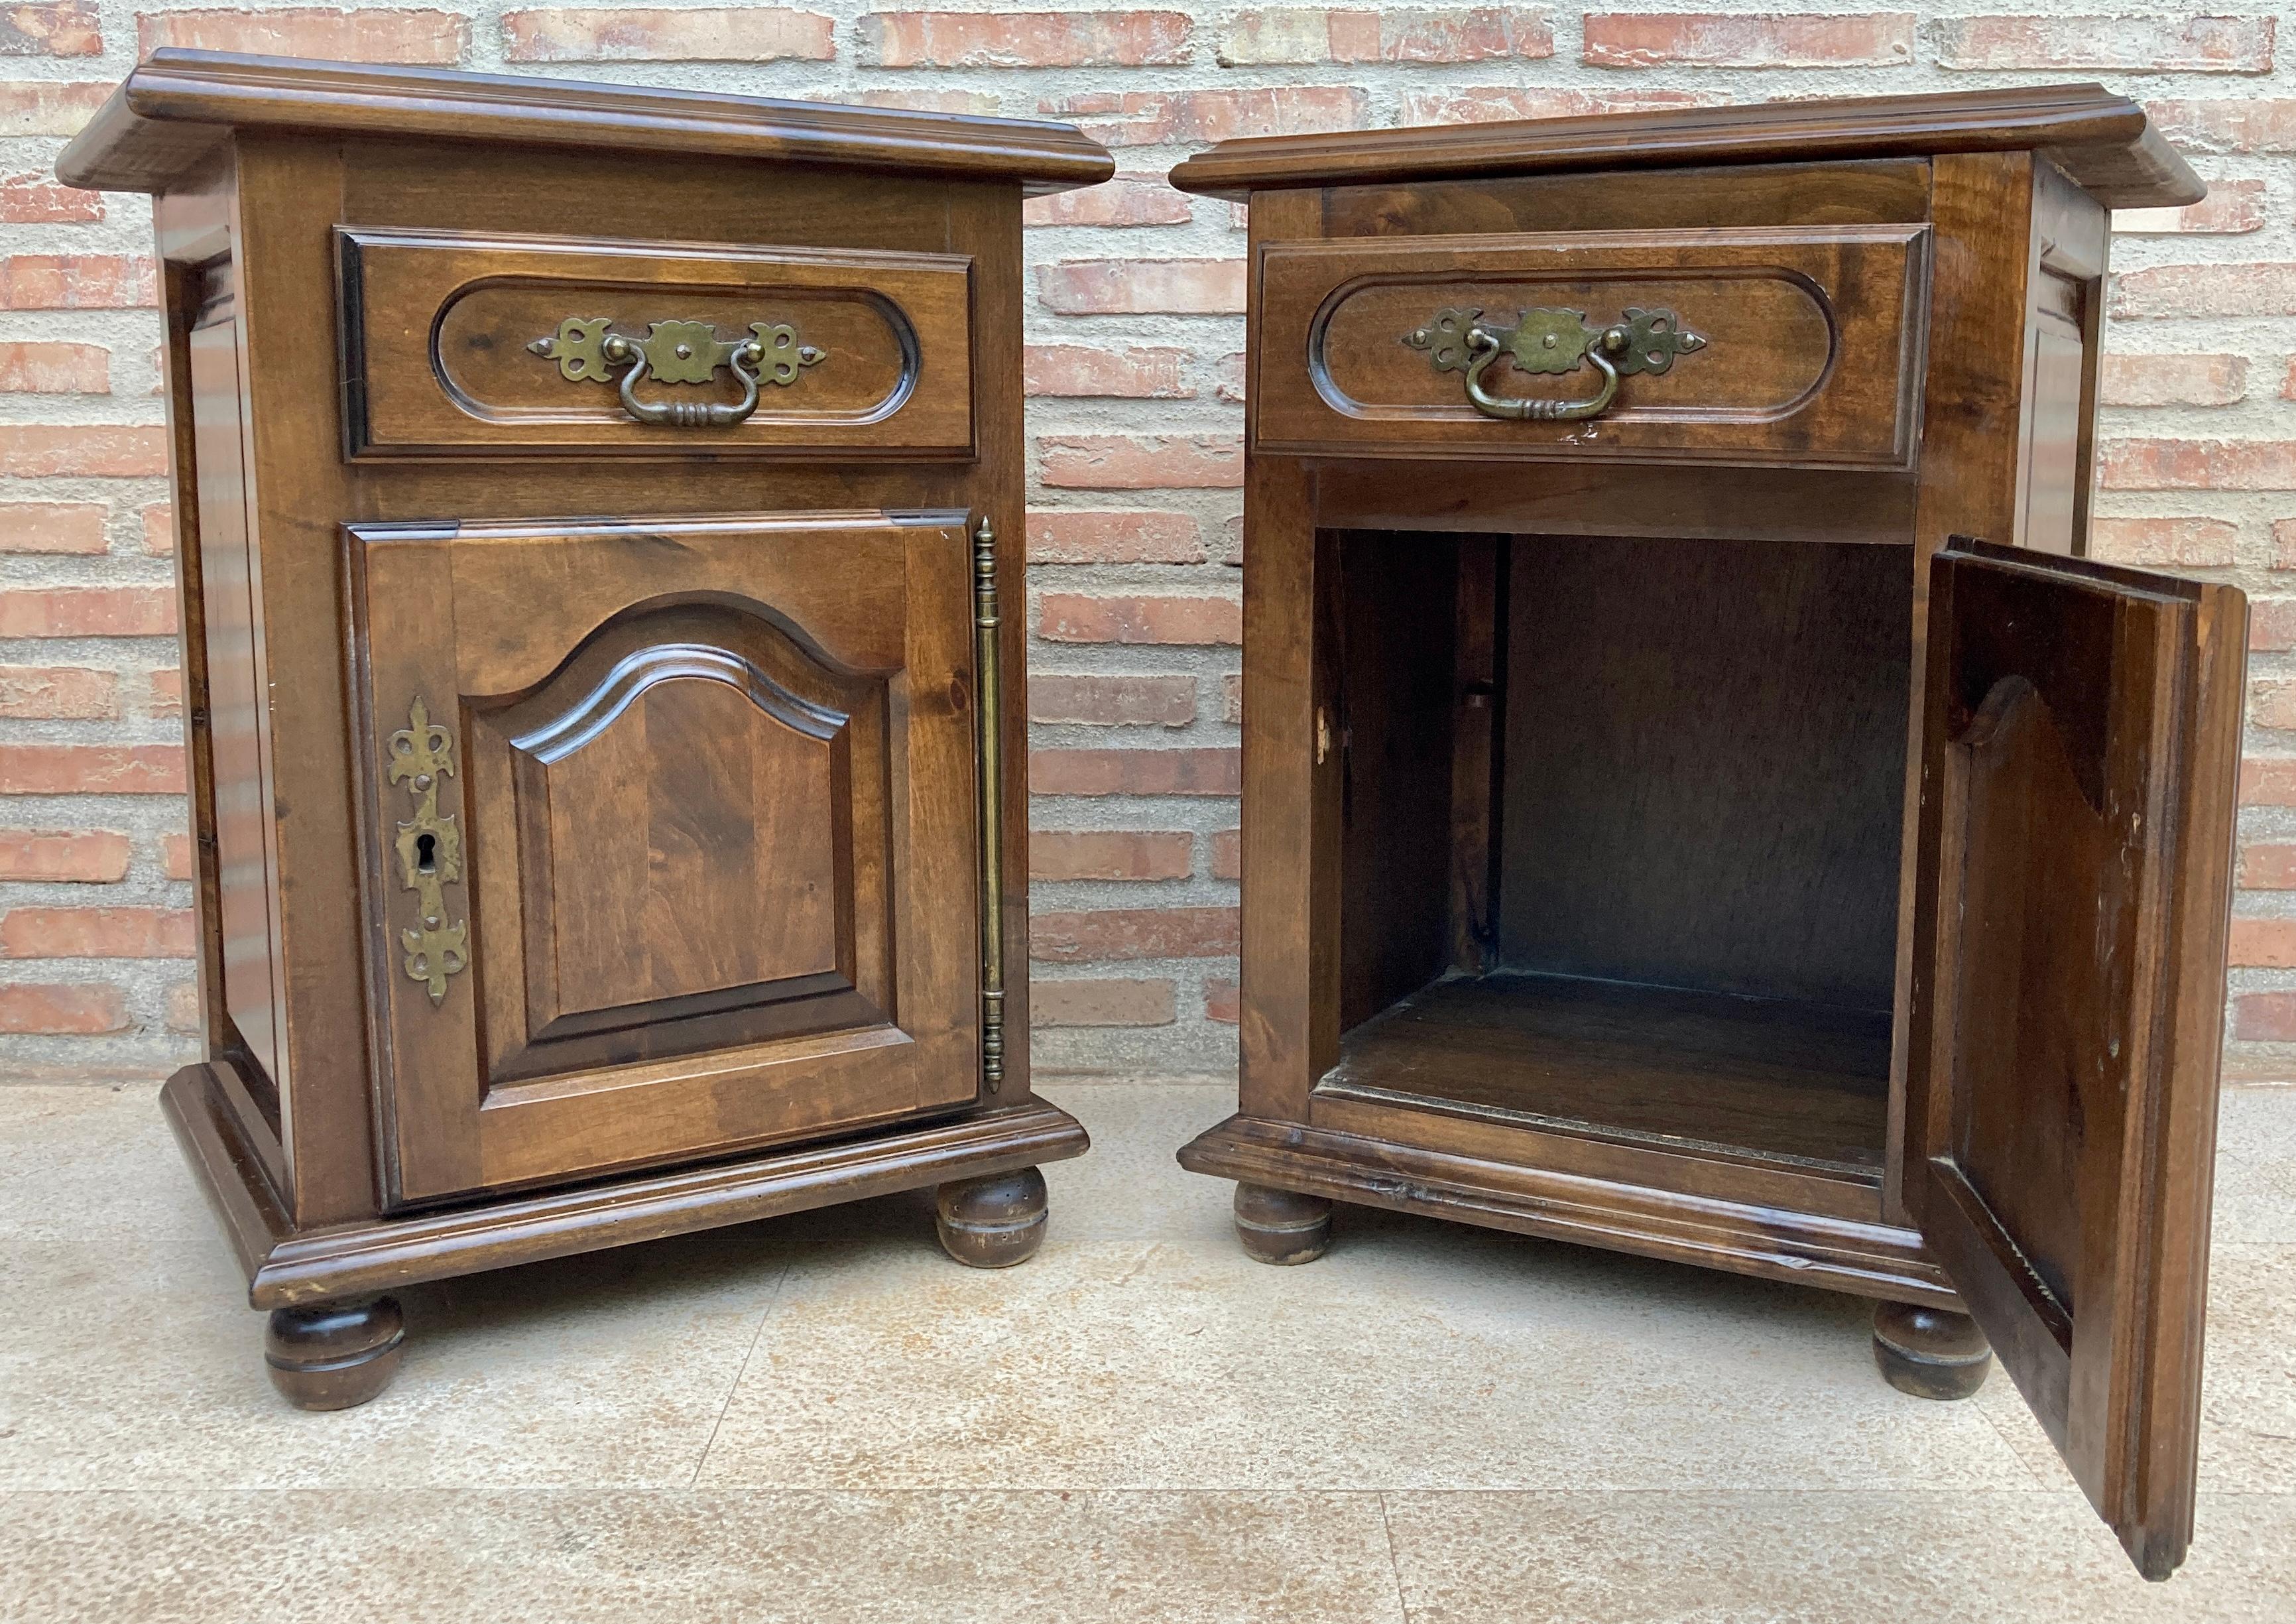 Spanish Colonial 20th Spanish Nightstands with Drawer & Bronze Details, 1920, Set of 2 For Sale